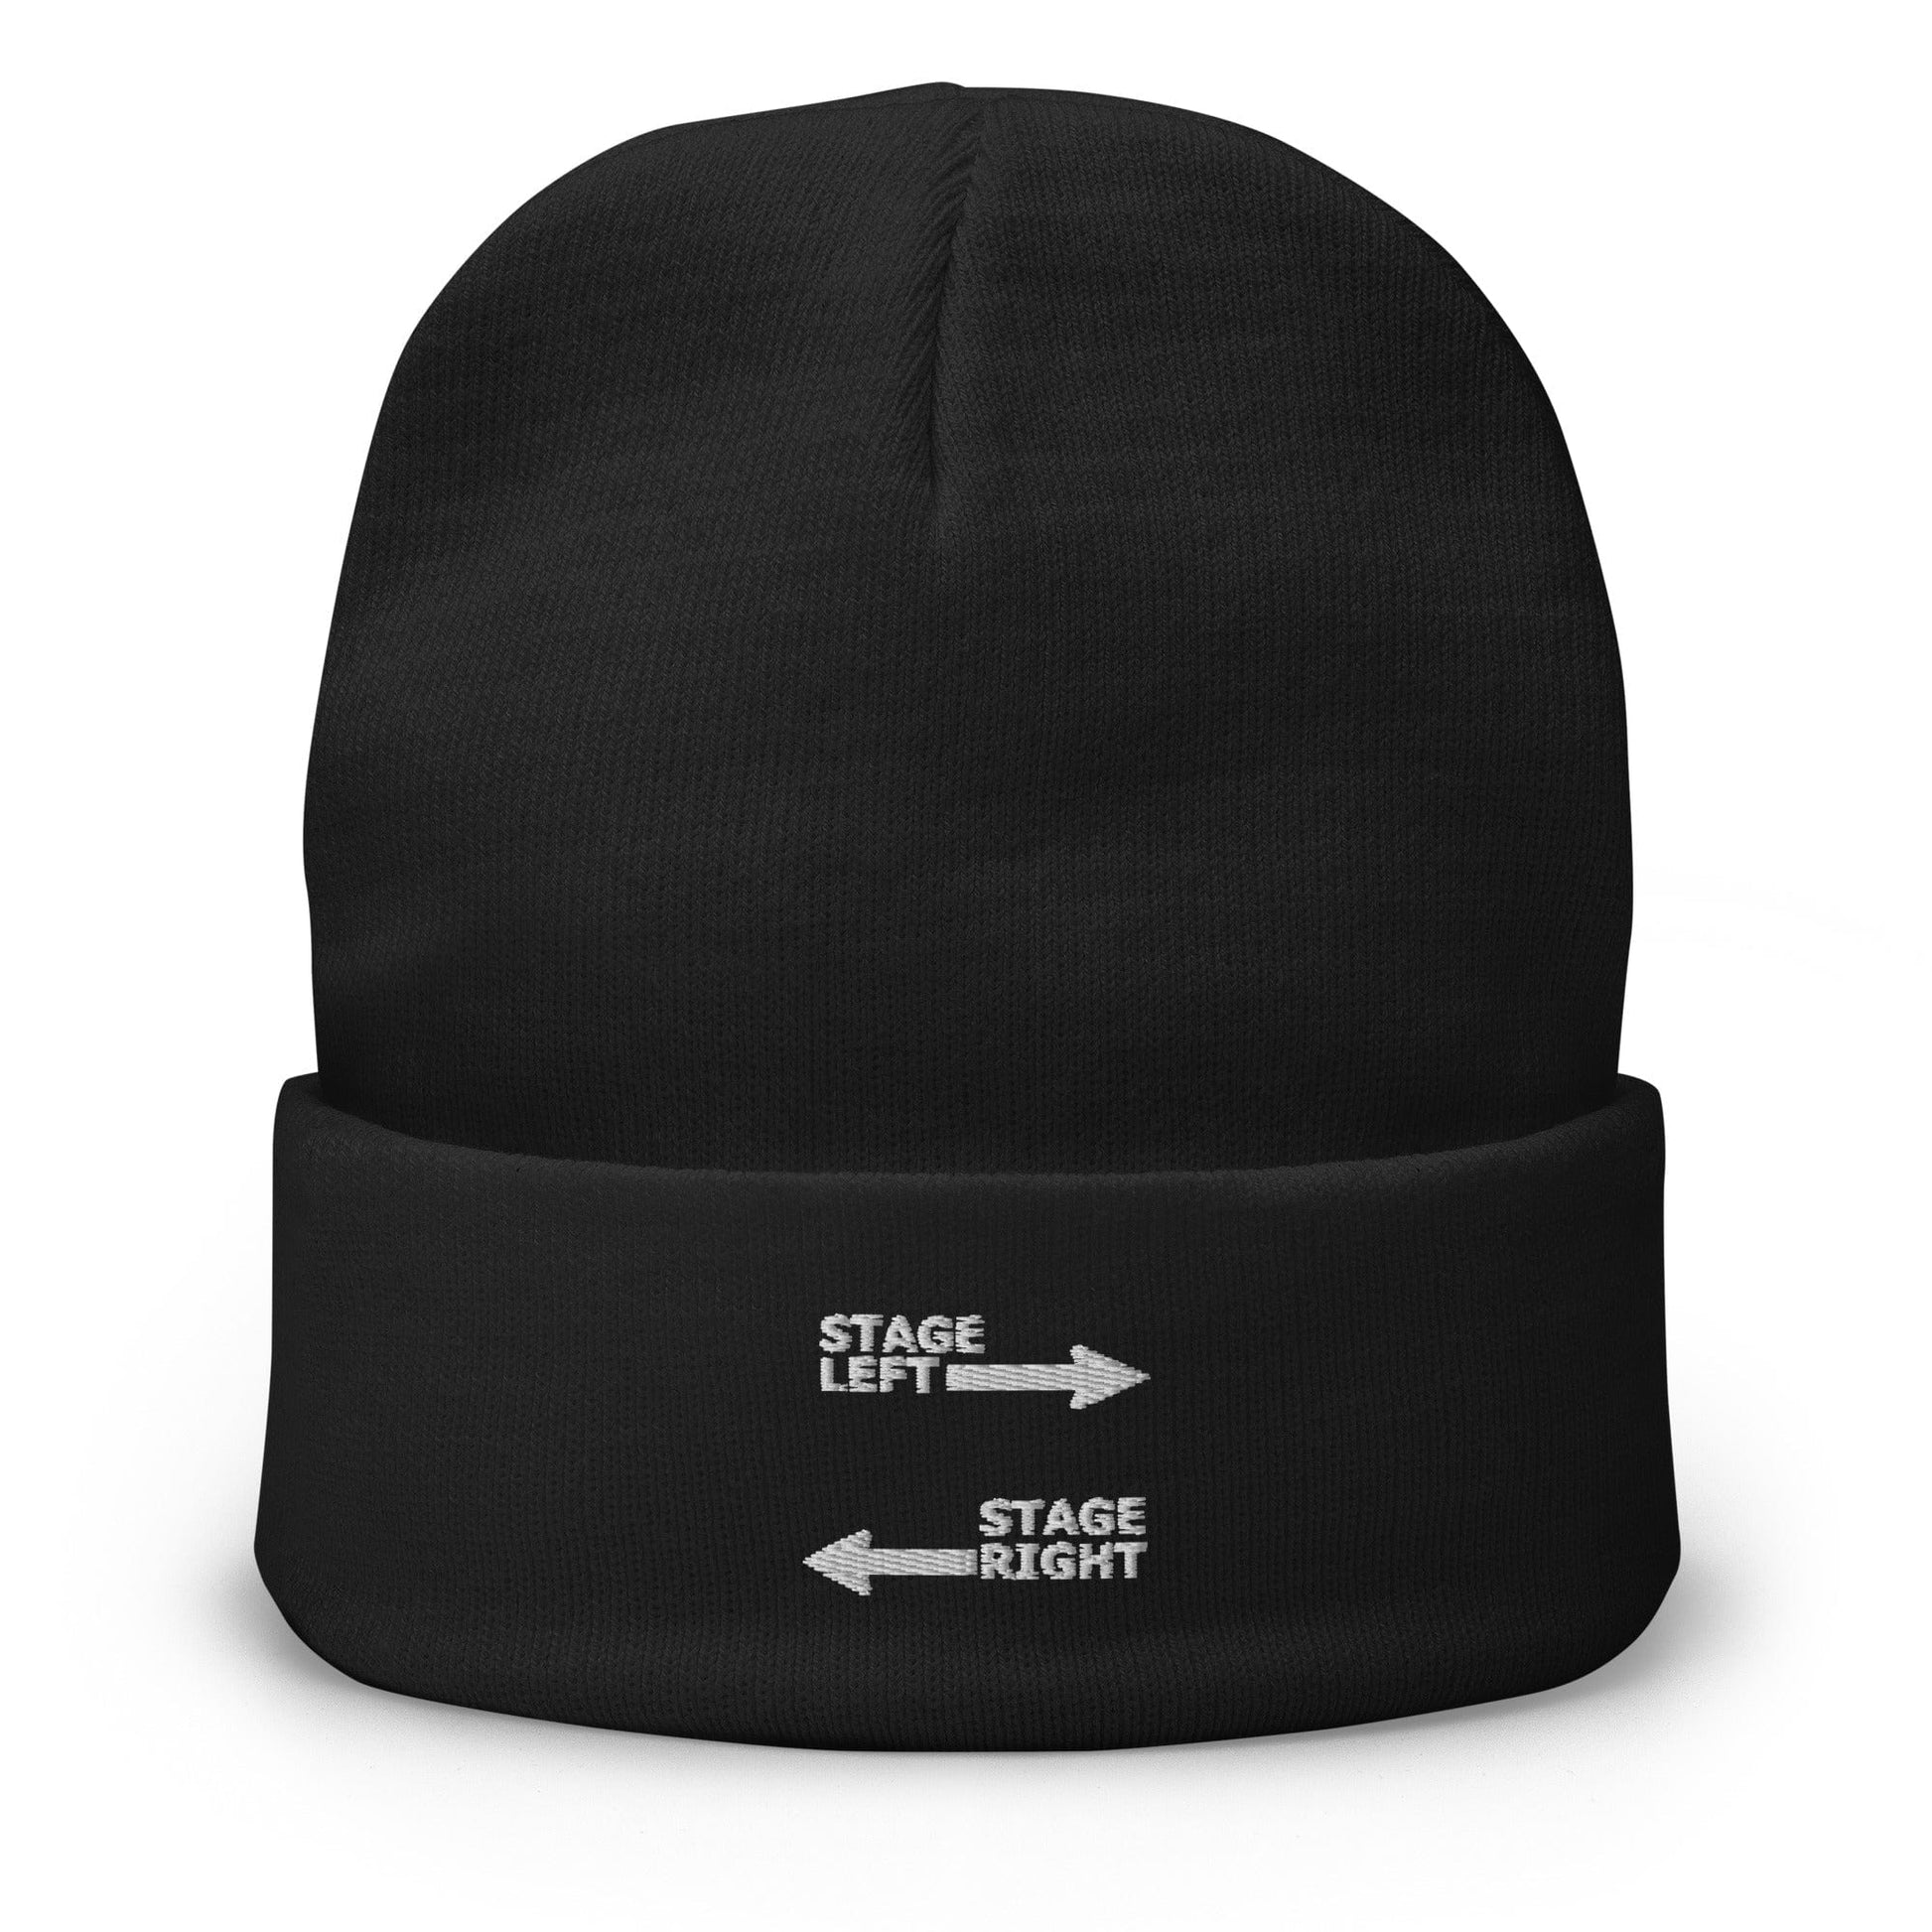 Production Apparel Stage Left - Stage Right Beanie Black